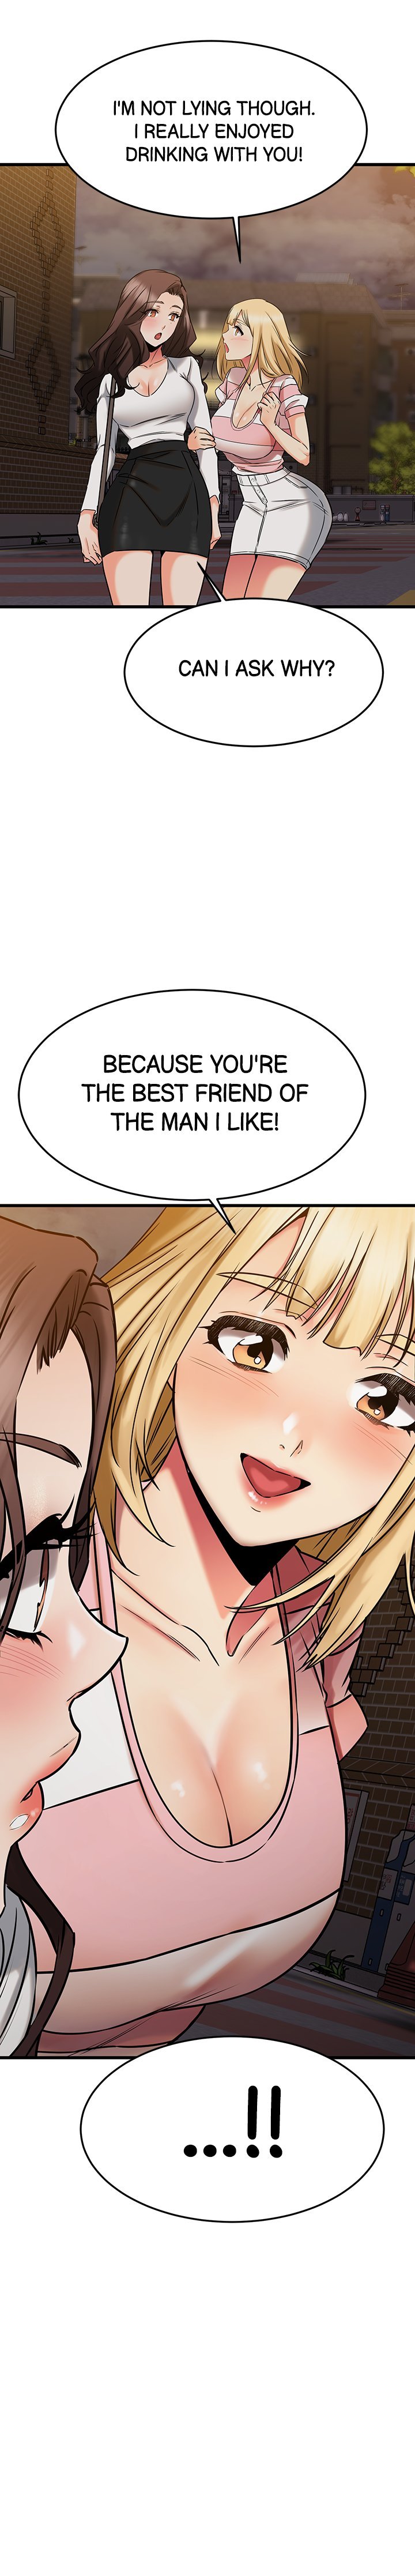 my-female-friend-who-crossed-the-line-chap-45-20